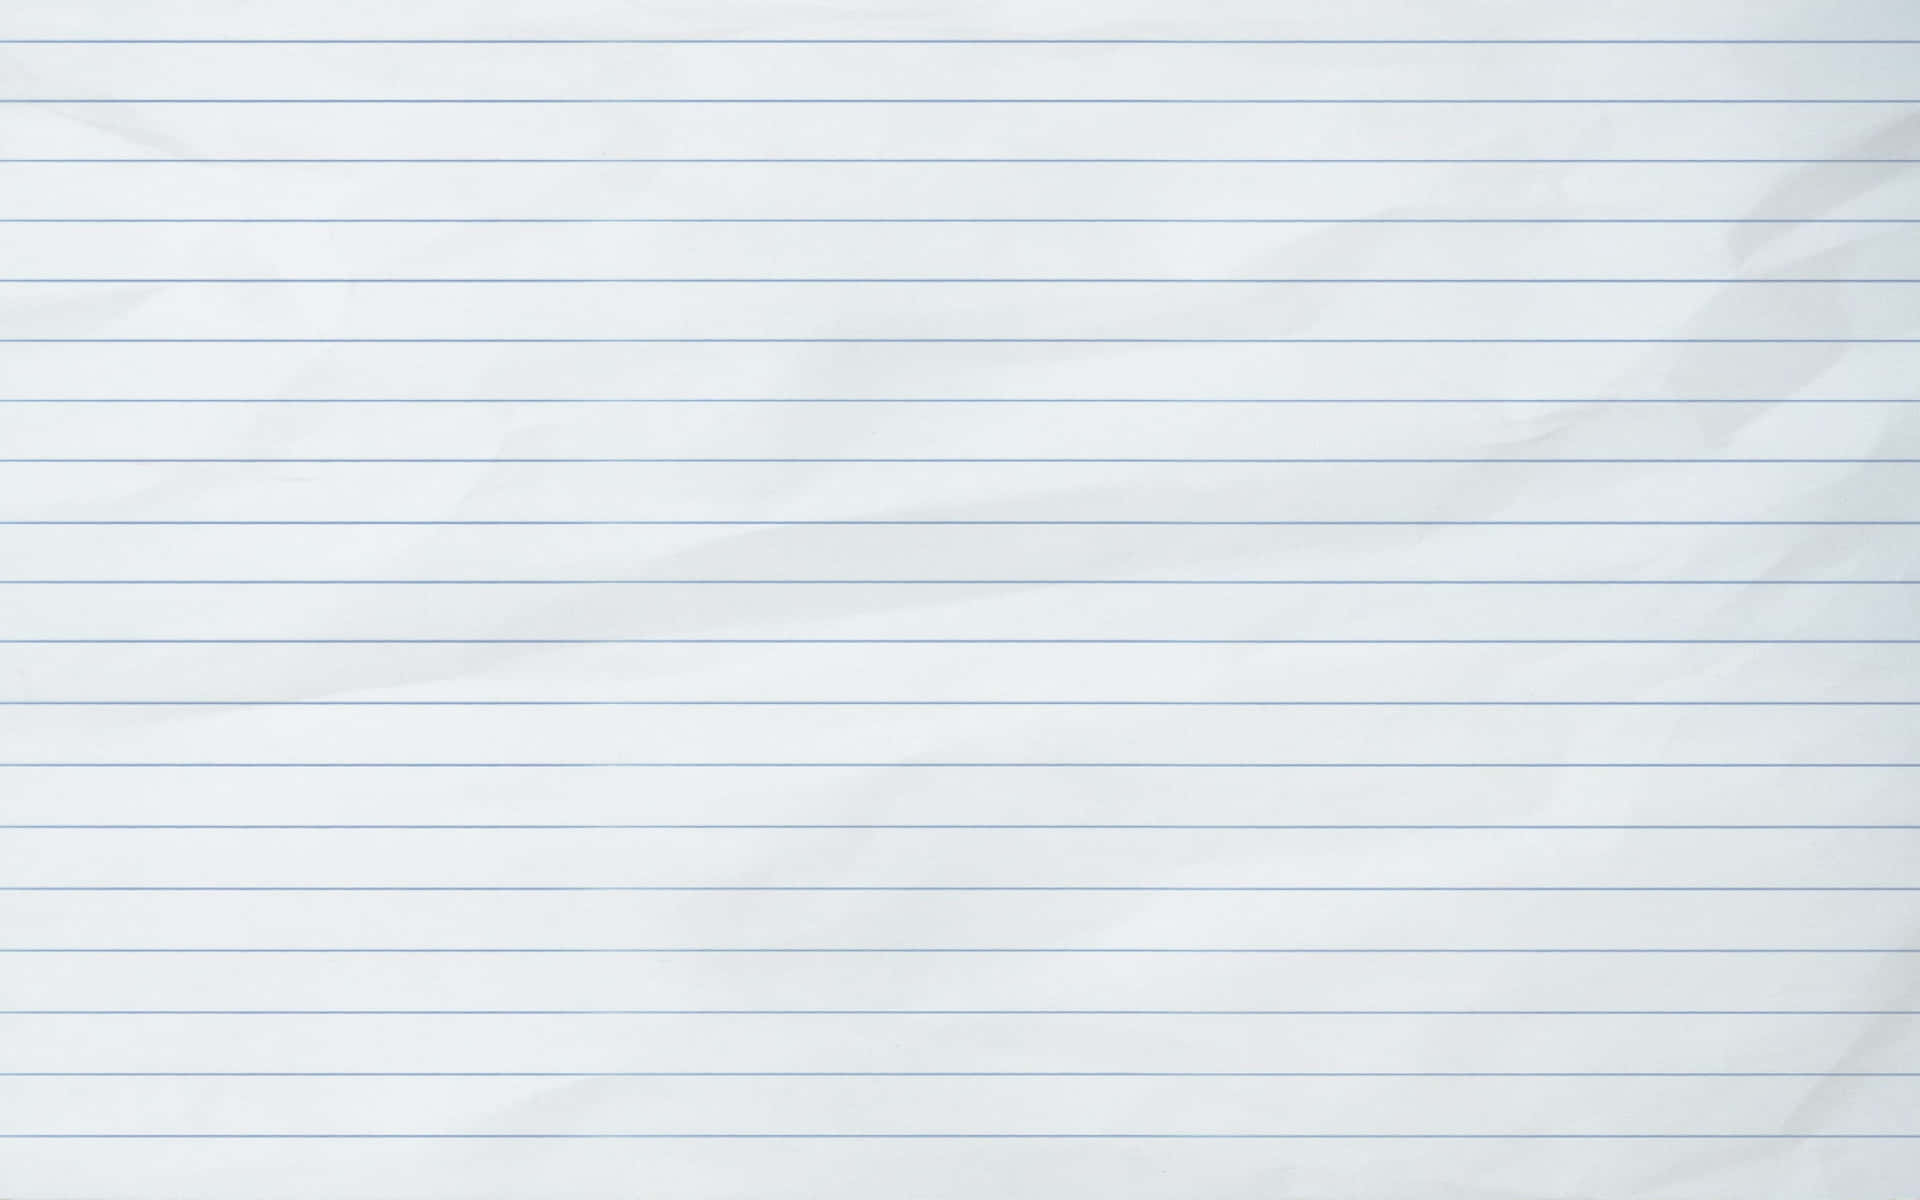 Lined Paper Background Wallpaper